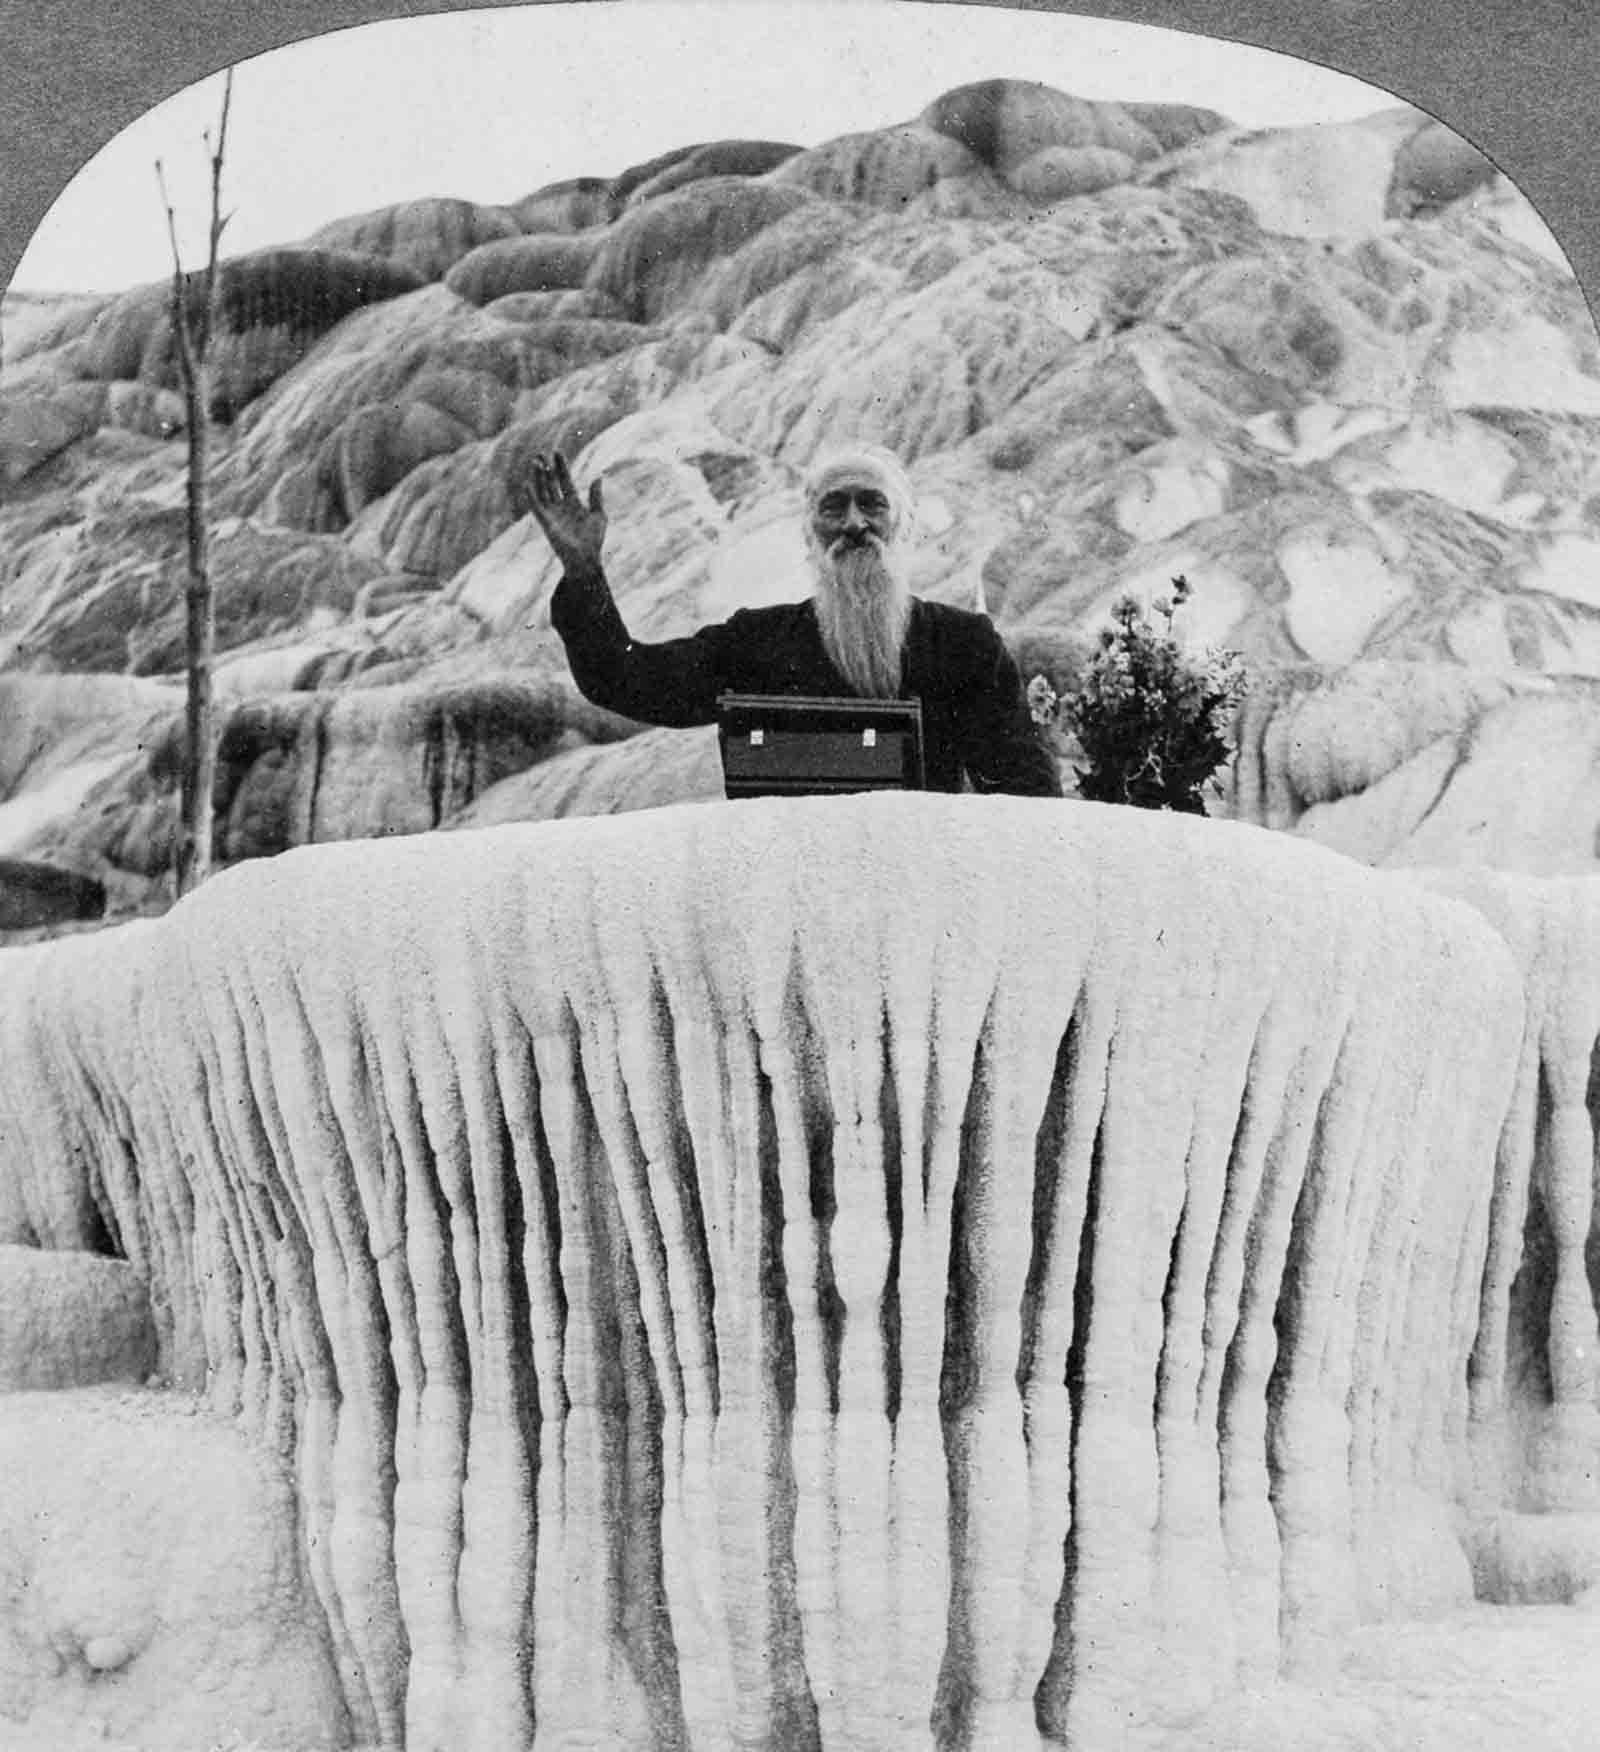 A man stands behind the “Pulpit Terrace” formation at the Mammoth Hot Springs in Yellowstone, 1904.